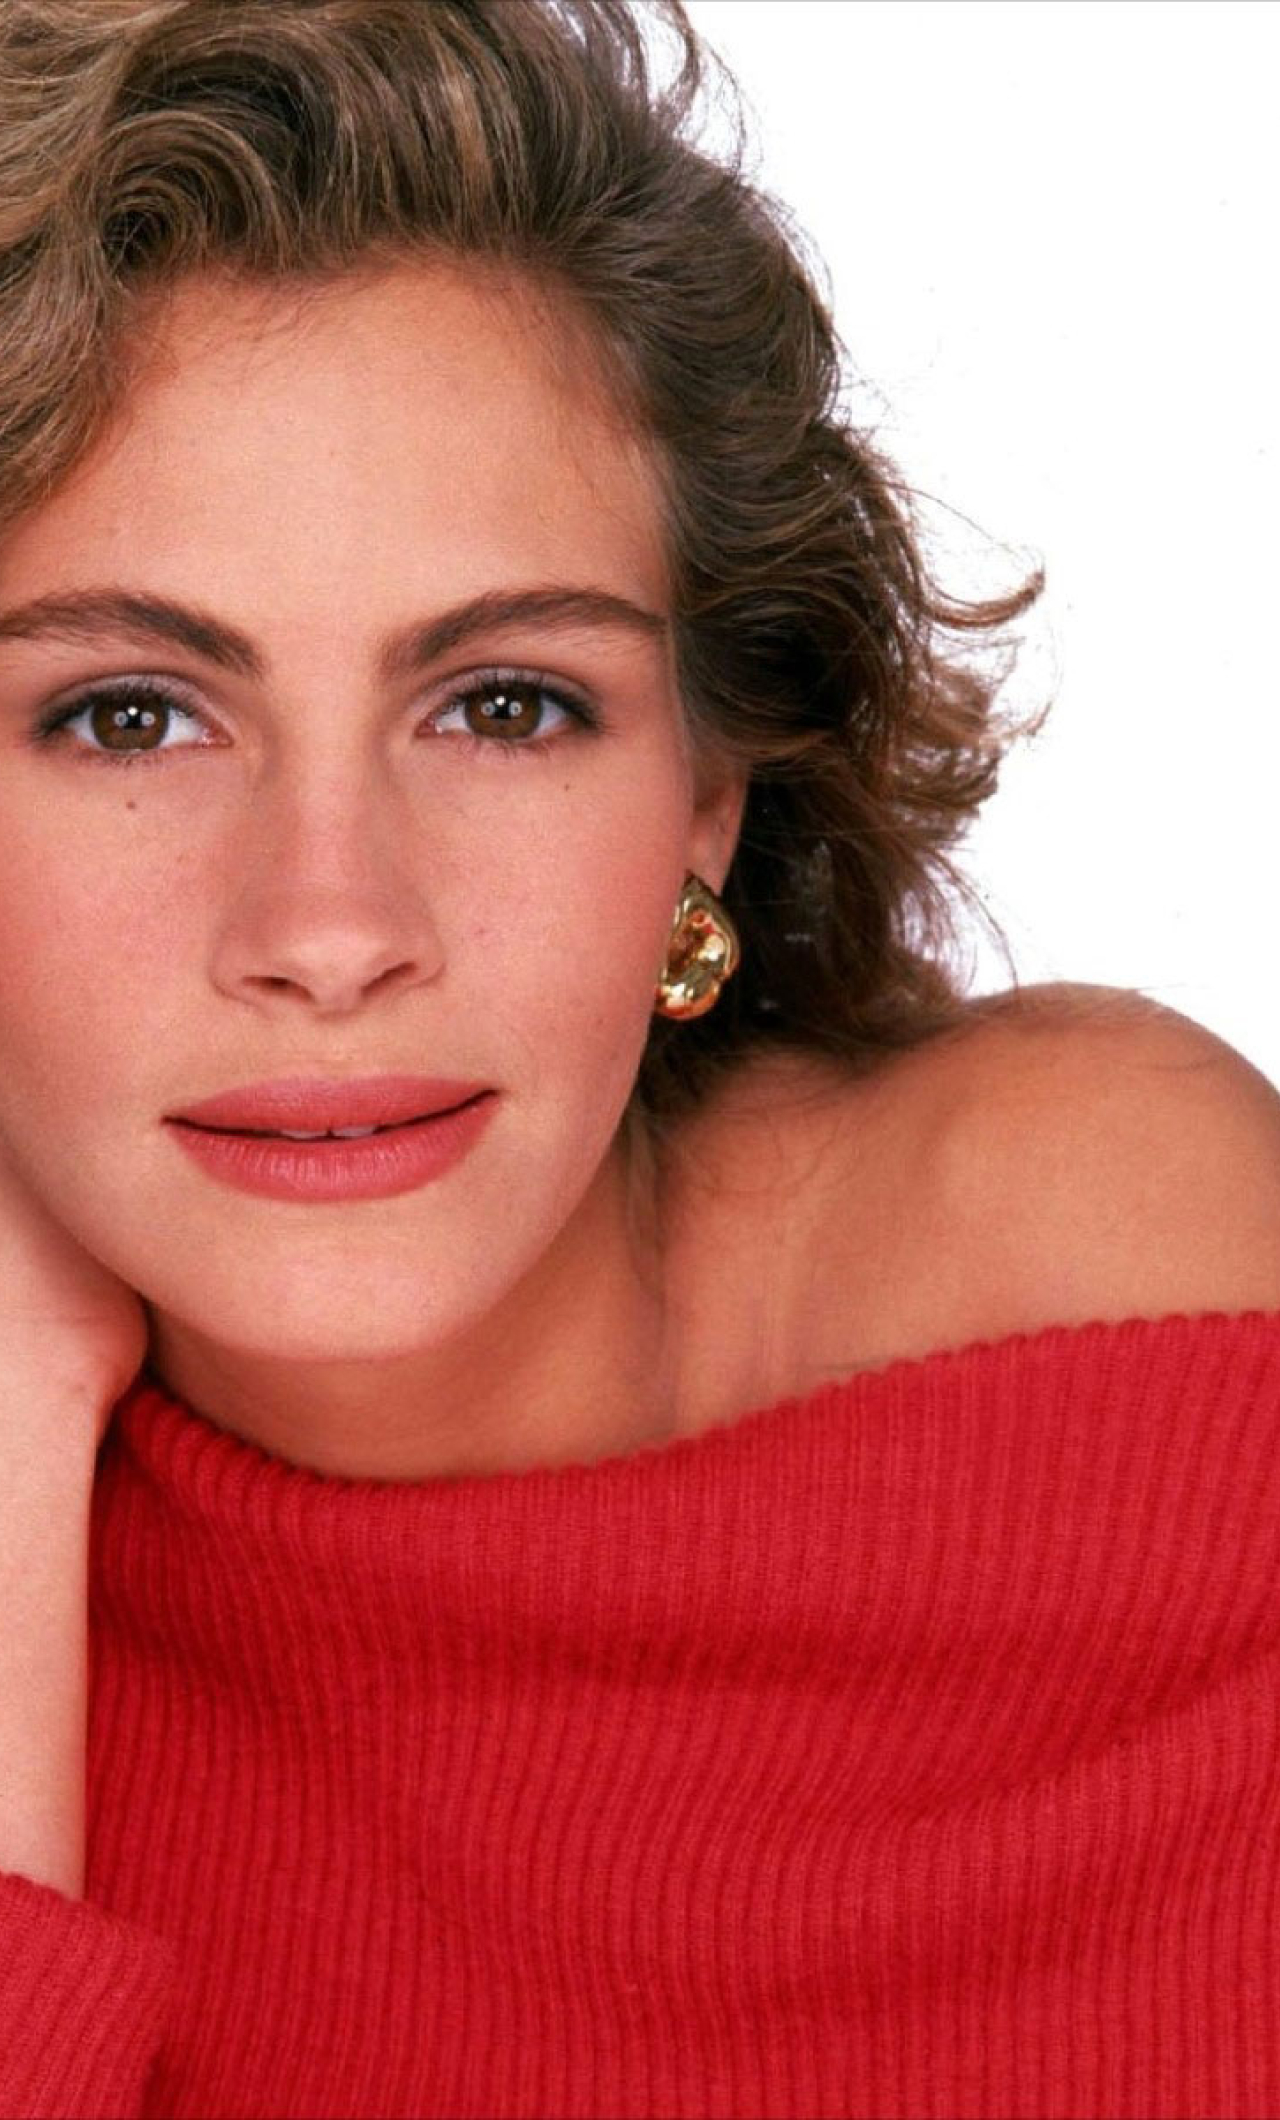 1280x21 Julia Roberts Red Lip Images Iphone 6 Plus Wallpaper Hd Celebrities 4k Wallpapers Images Photos And Background Wallpapers Den